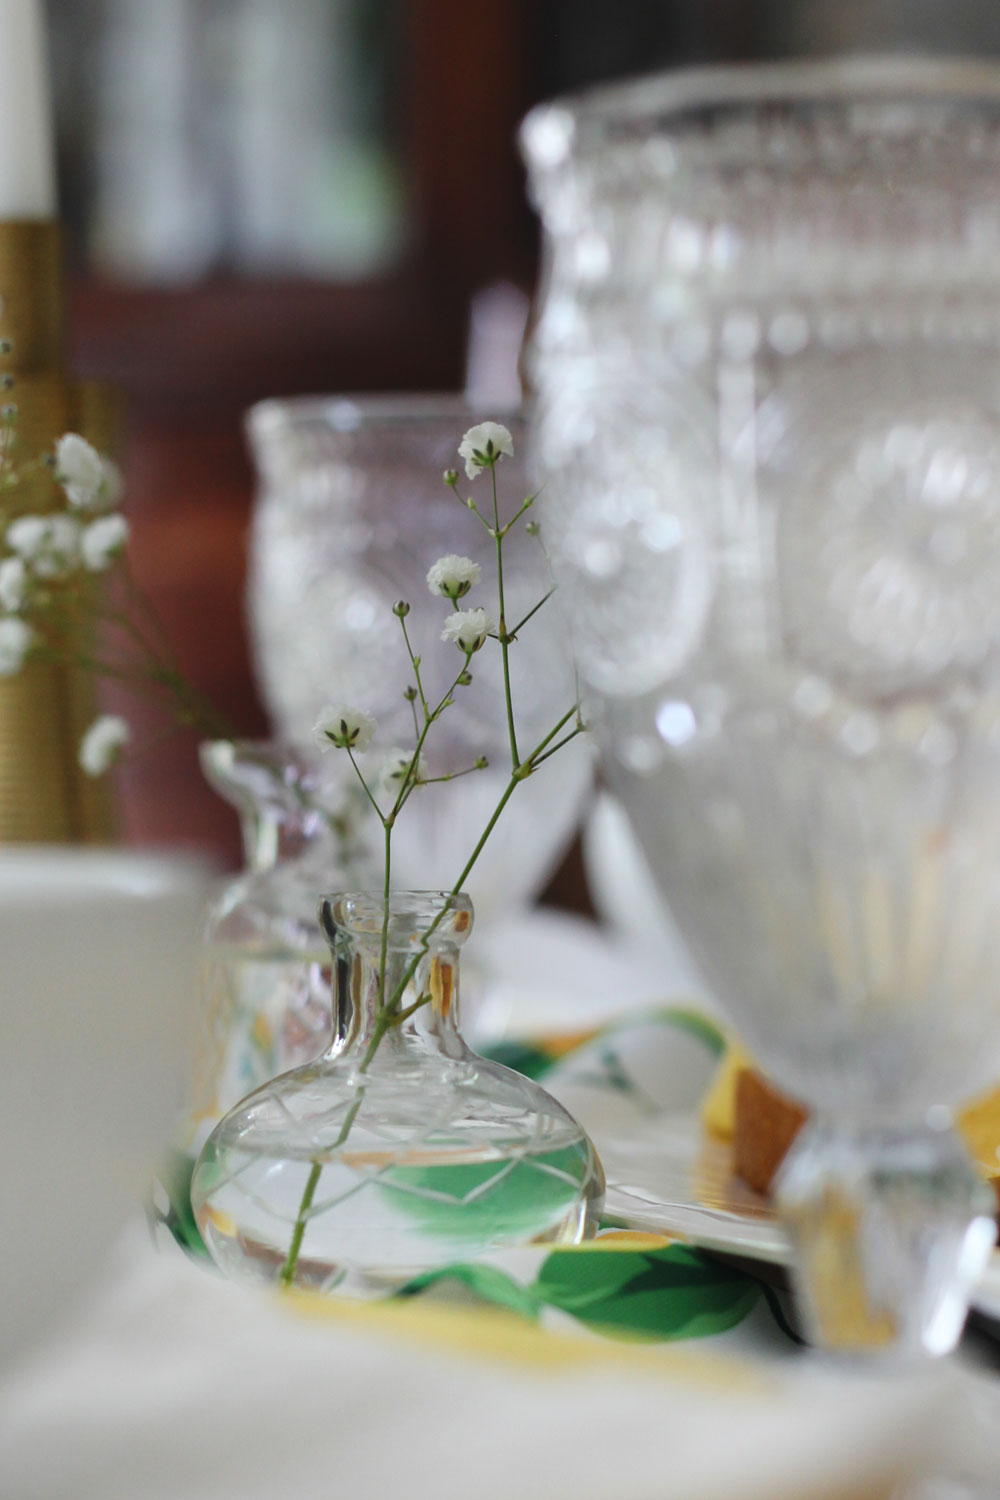 Mix and match vintage inspired bud vases in summer tabletop decor